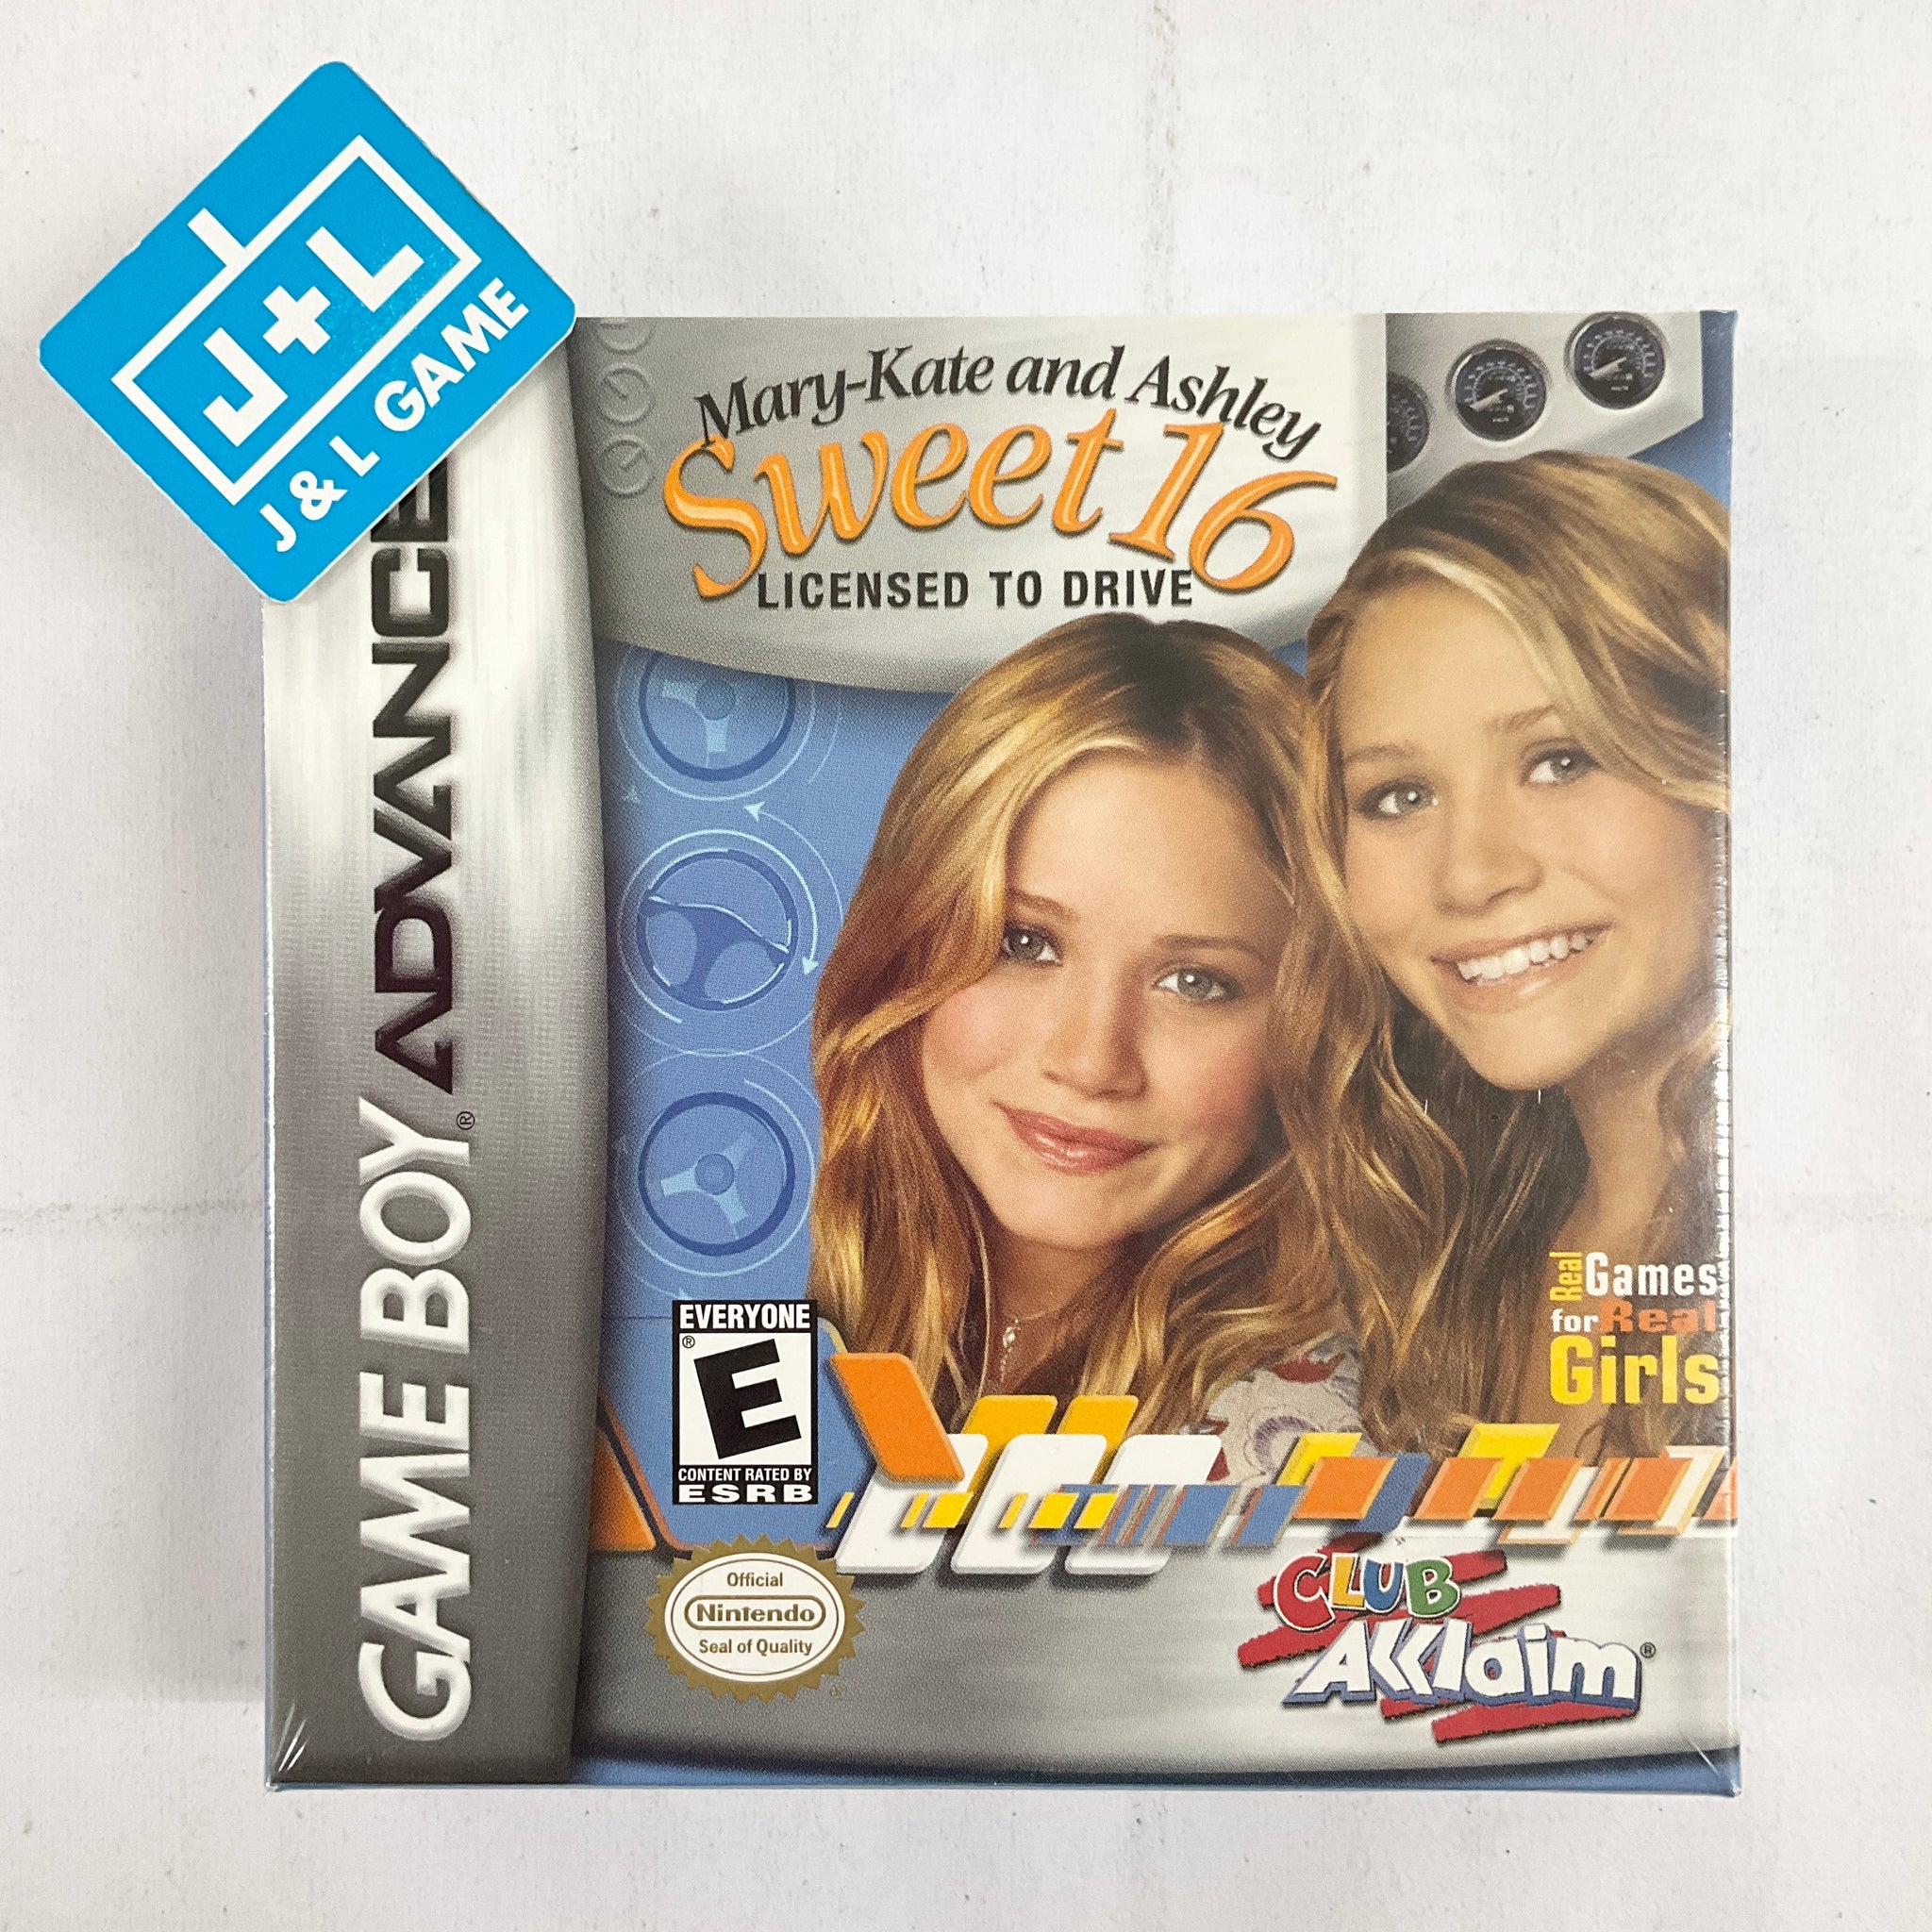 Mary-Kate and Ashley: Sweet 16 - Licensed to Drive - (GBA) Game Boy Advance Video Games Acclaim   